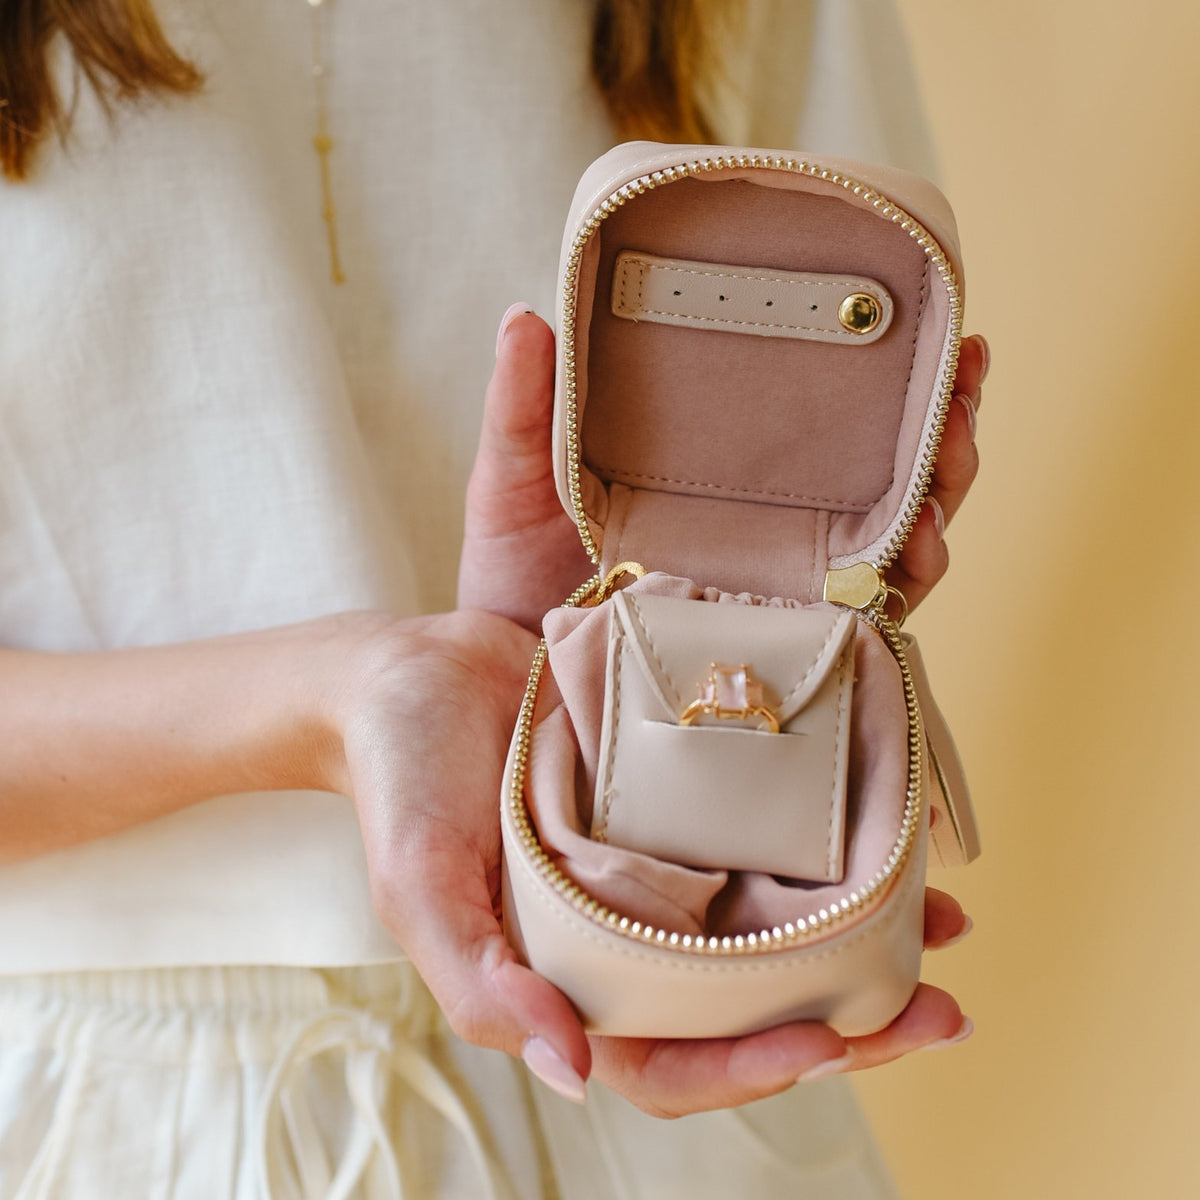 Wanderlust Daily Jewelry Bag - Blush Pink - SO PRETTY CARA COTTER